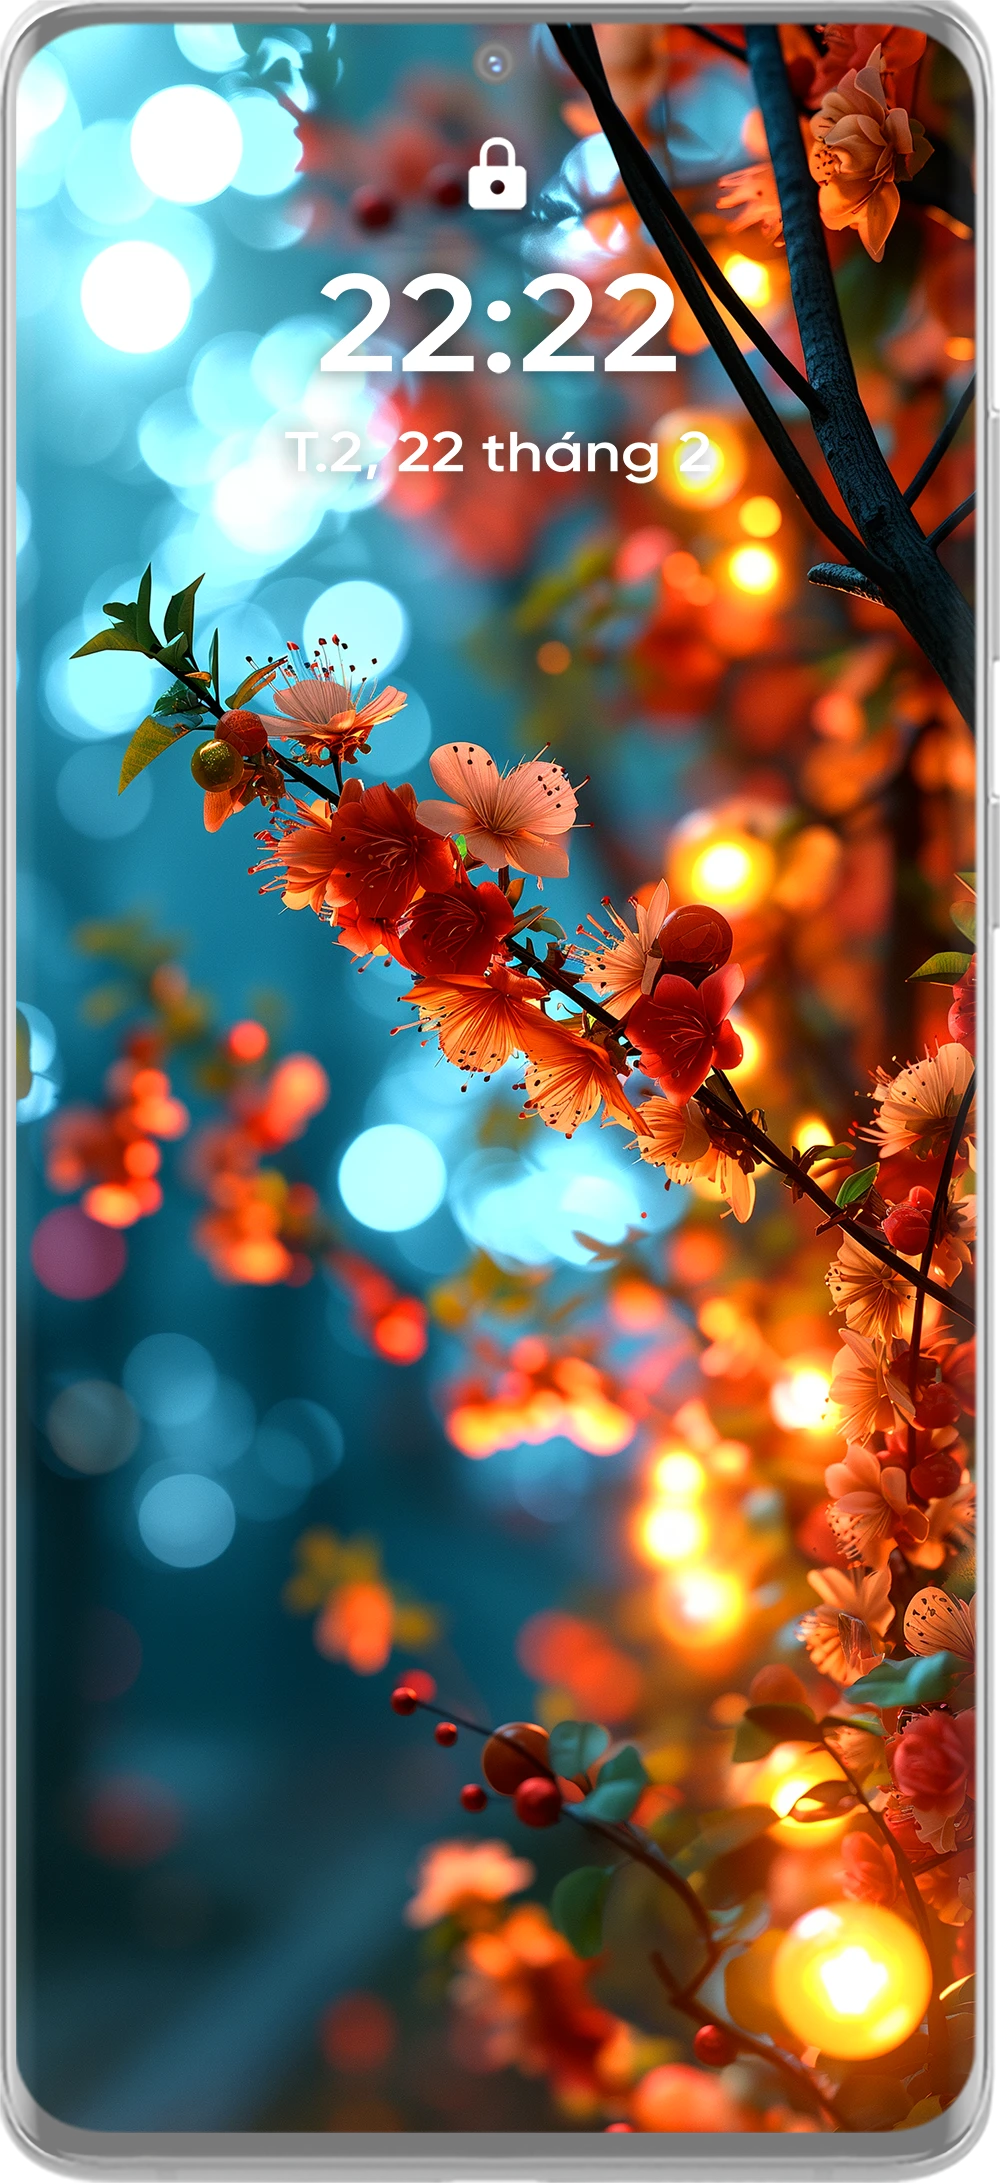 Samsung Galaxy S20 Ultra Phone Wallpapers - Wallpaper Cave